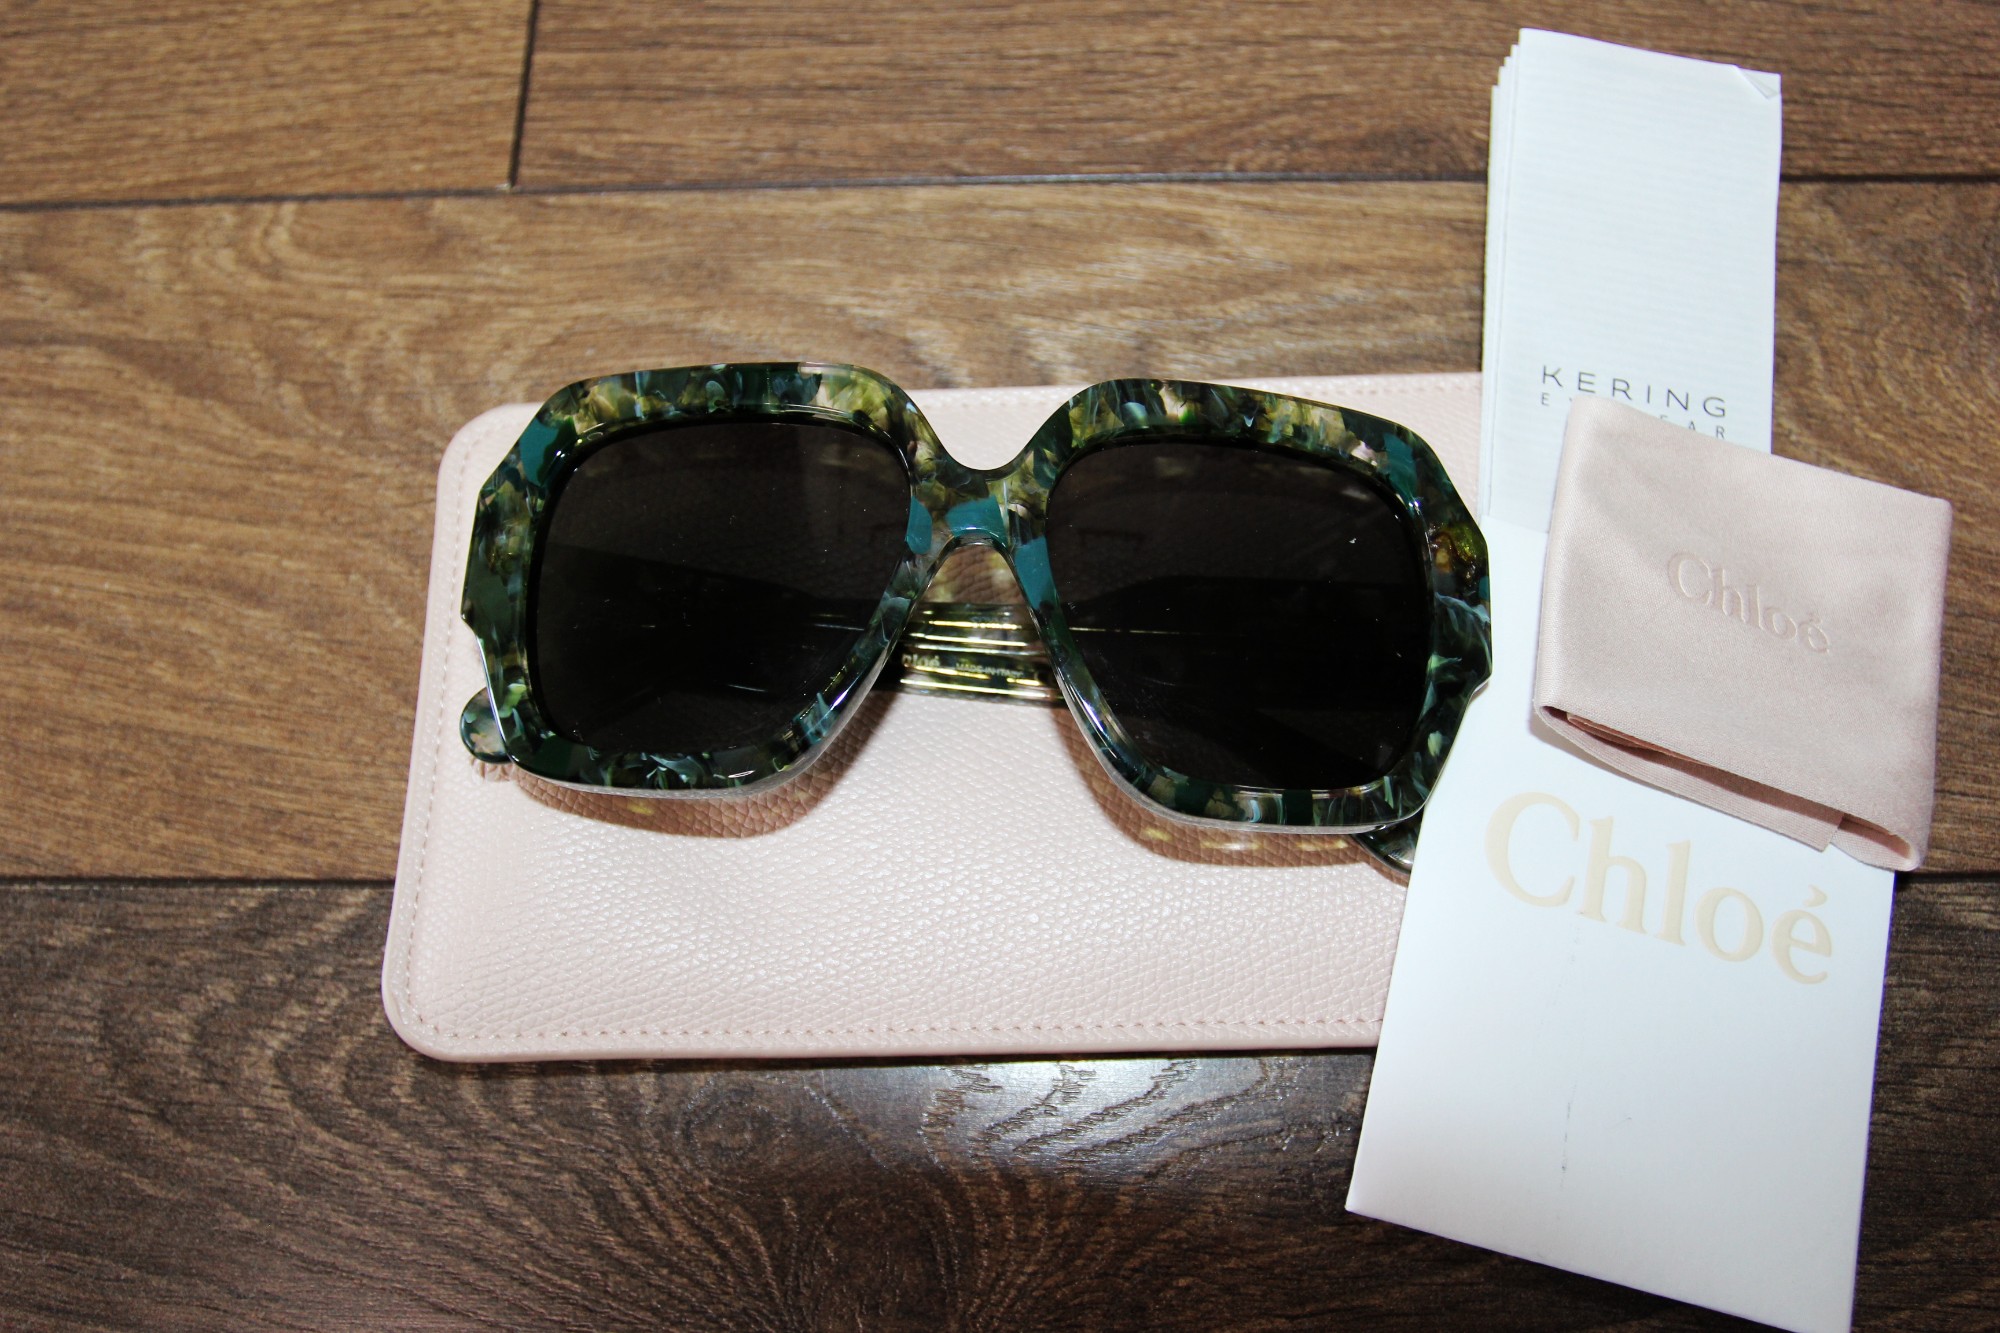 BNWT SS23 CHLOE RECYCLED ACETATE SQUARE SUNGLASSES - 2